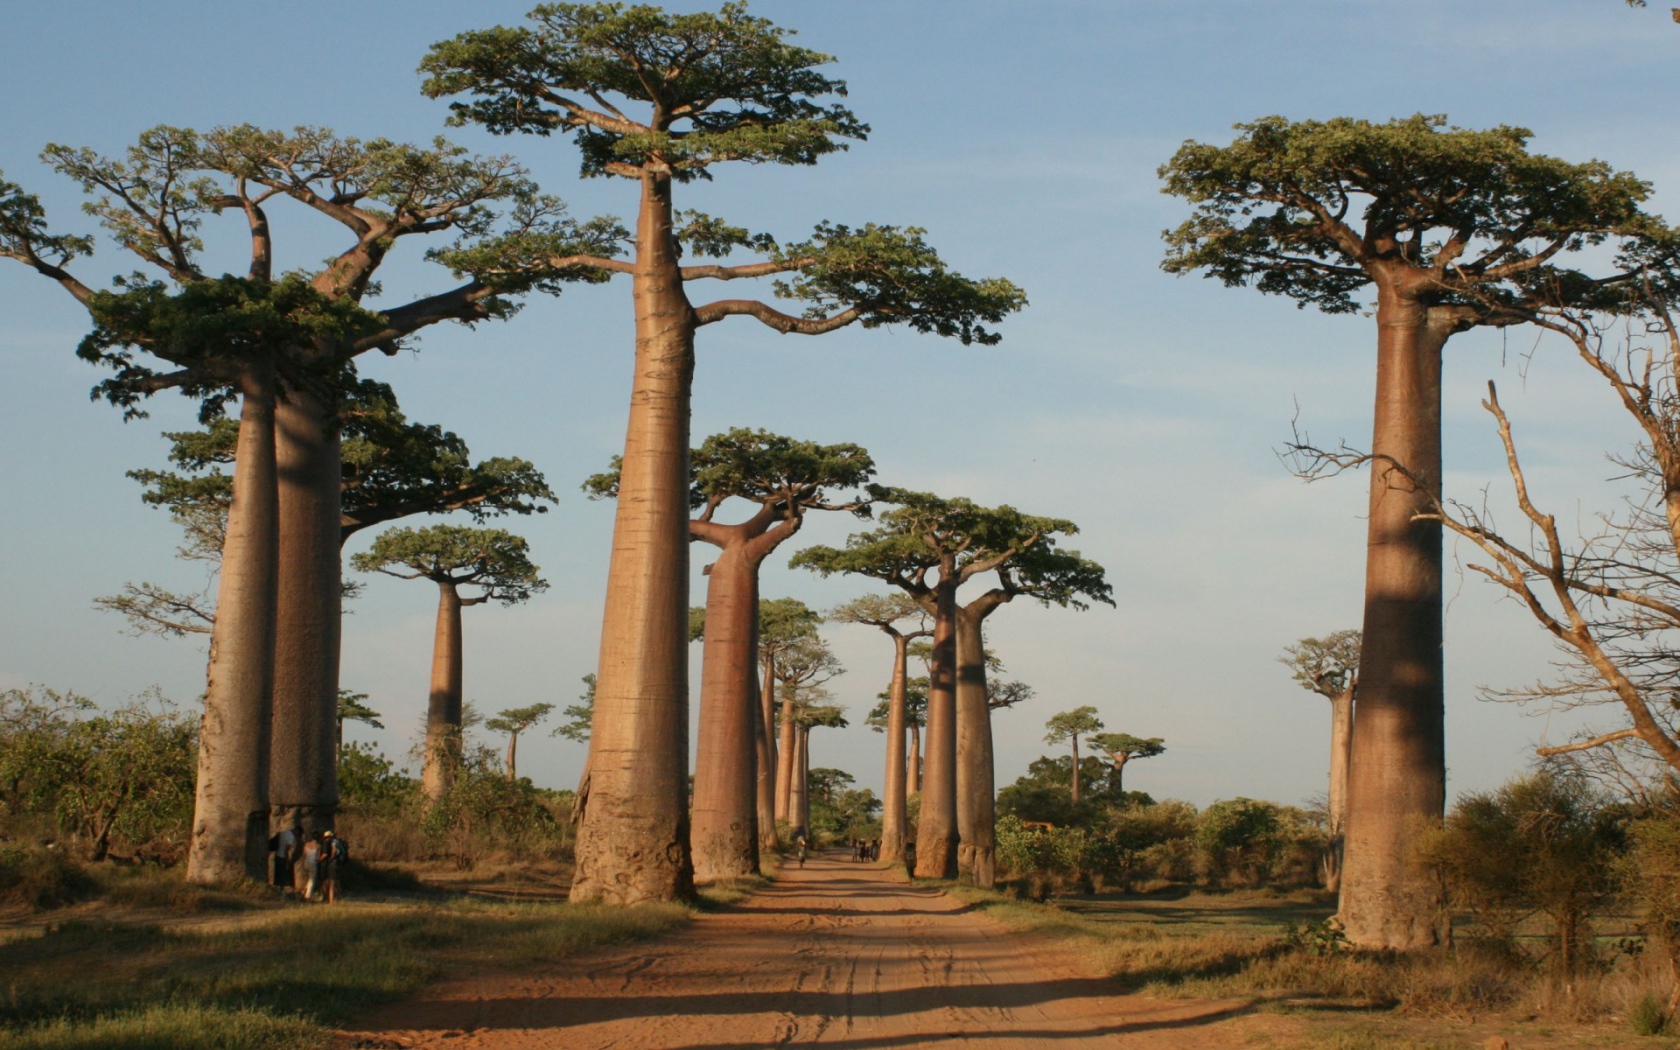 Trees beside the road in Madagascar